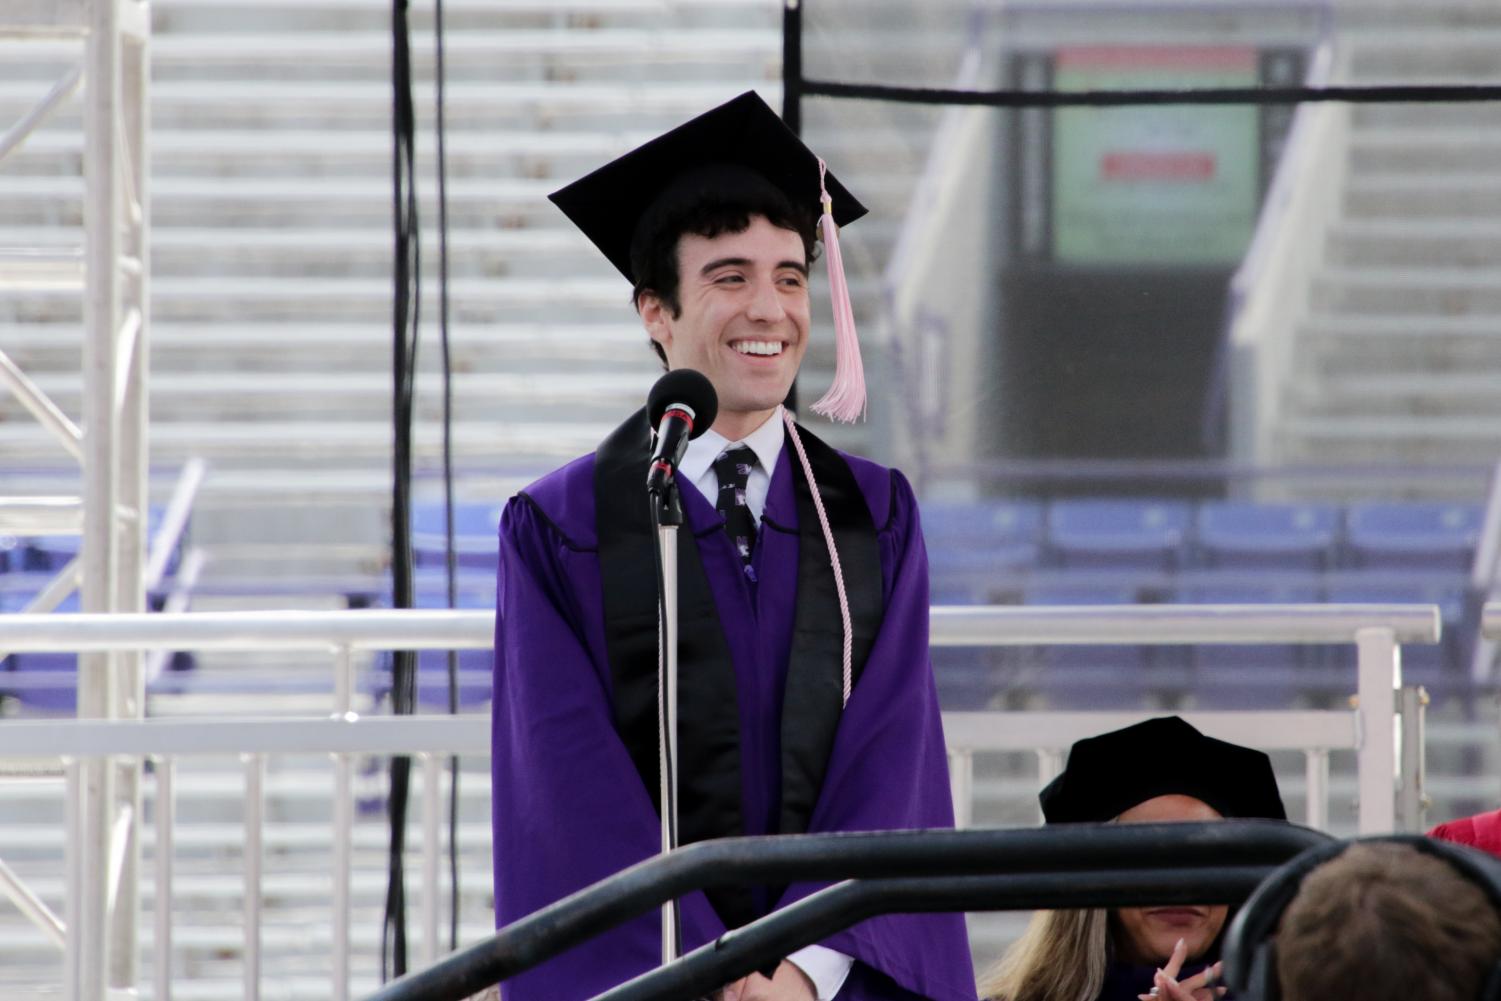 A student in a cap and gown smiles in front of a microphone on stage.